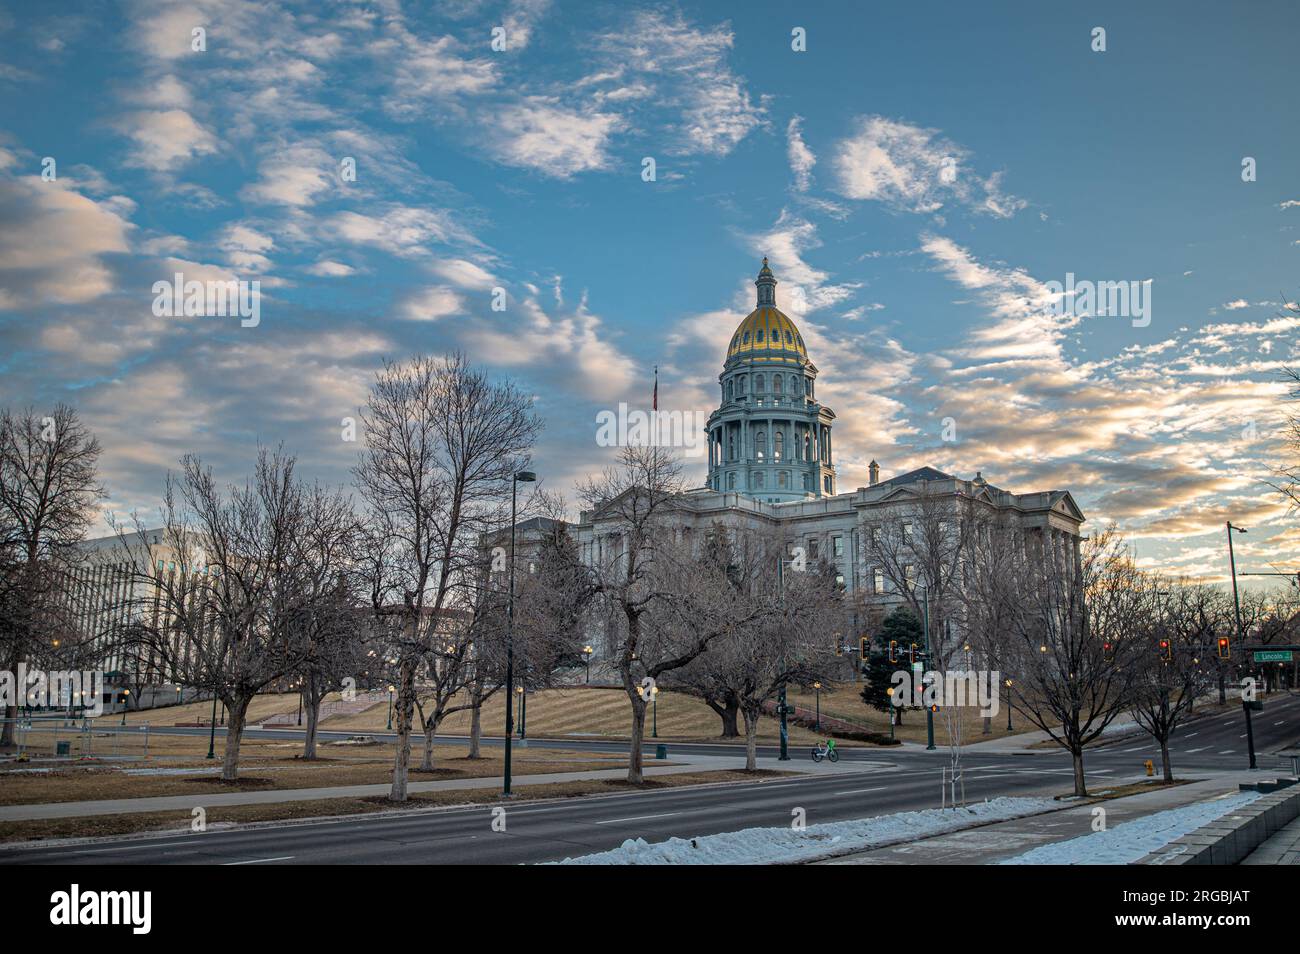 A beautiful shot of the Capitol building in Denver, Colorado as the sun comes up behind it on a quiet Sunday morning in mid-winter. Stock Photo